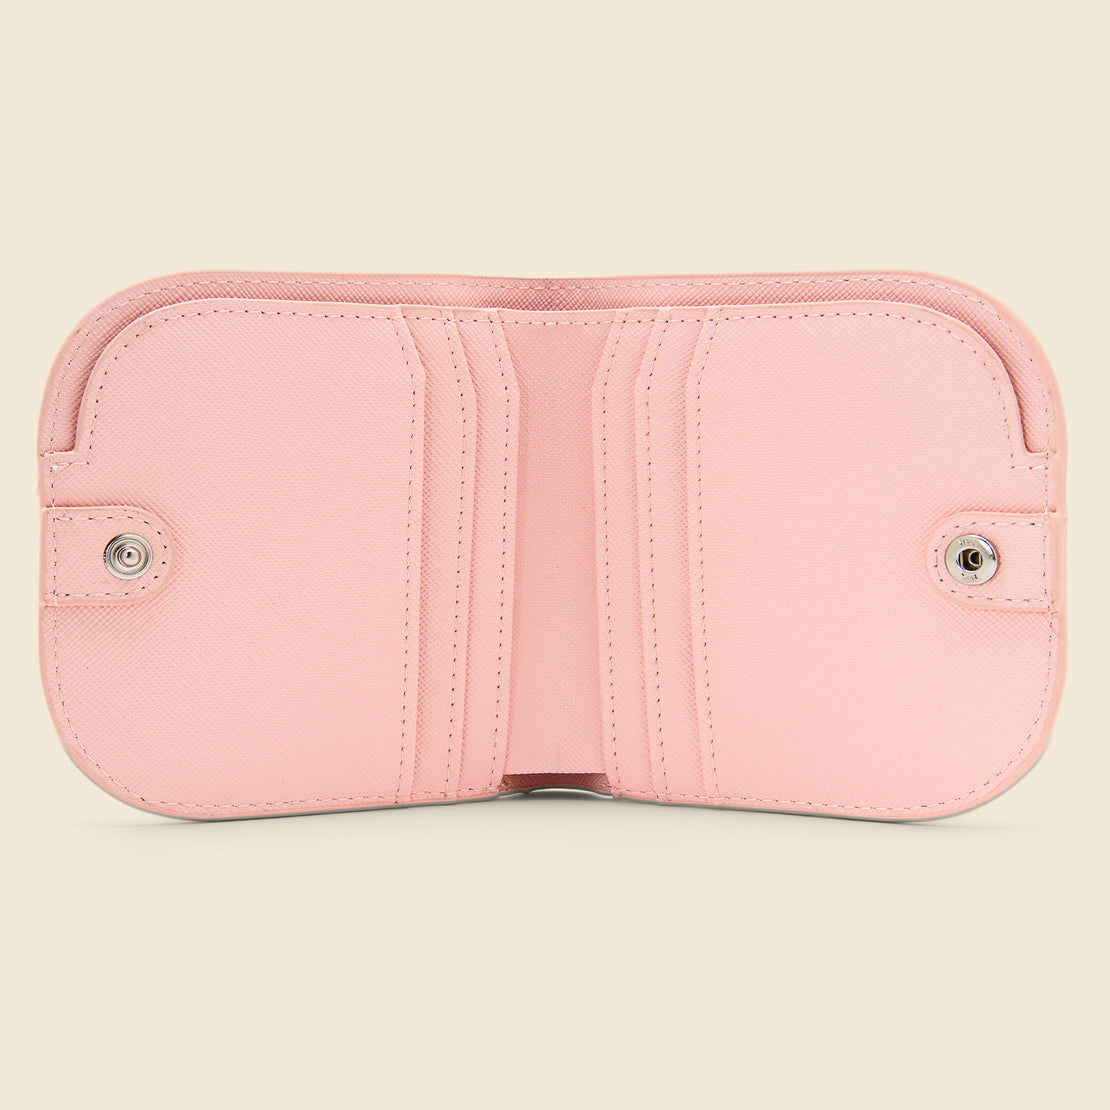 Dome Wallet - Pink - Poketo - STAG Provisions - W - Accessories - Wallet